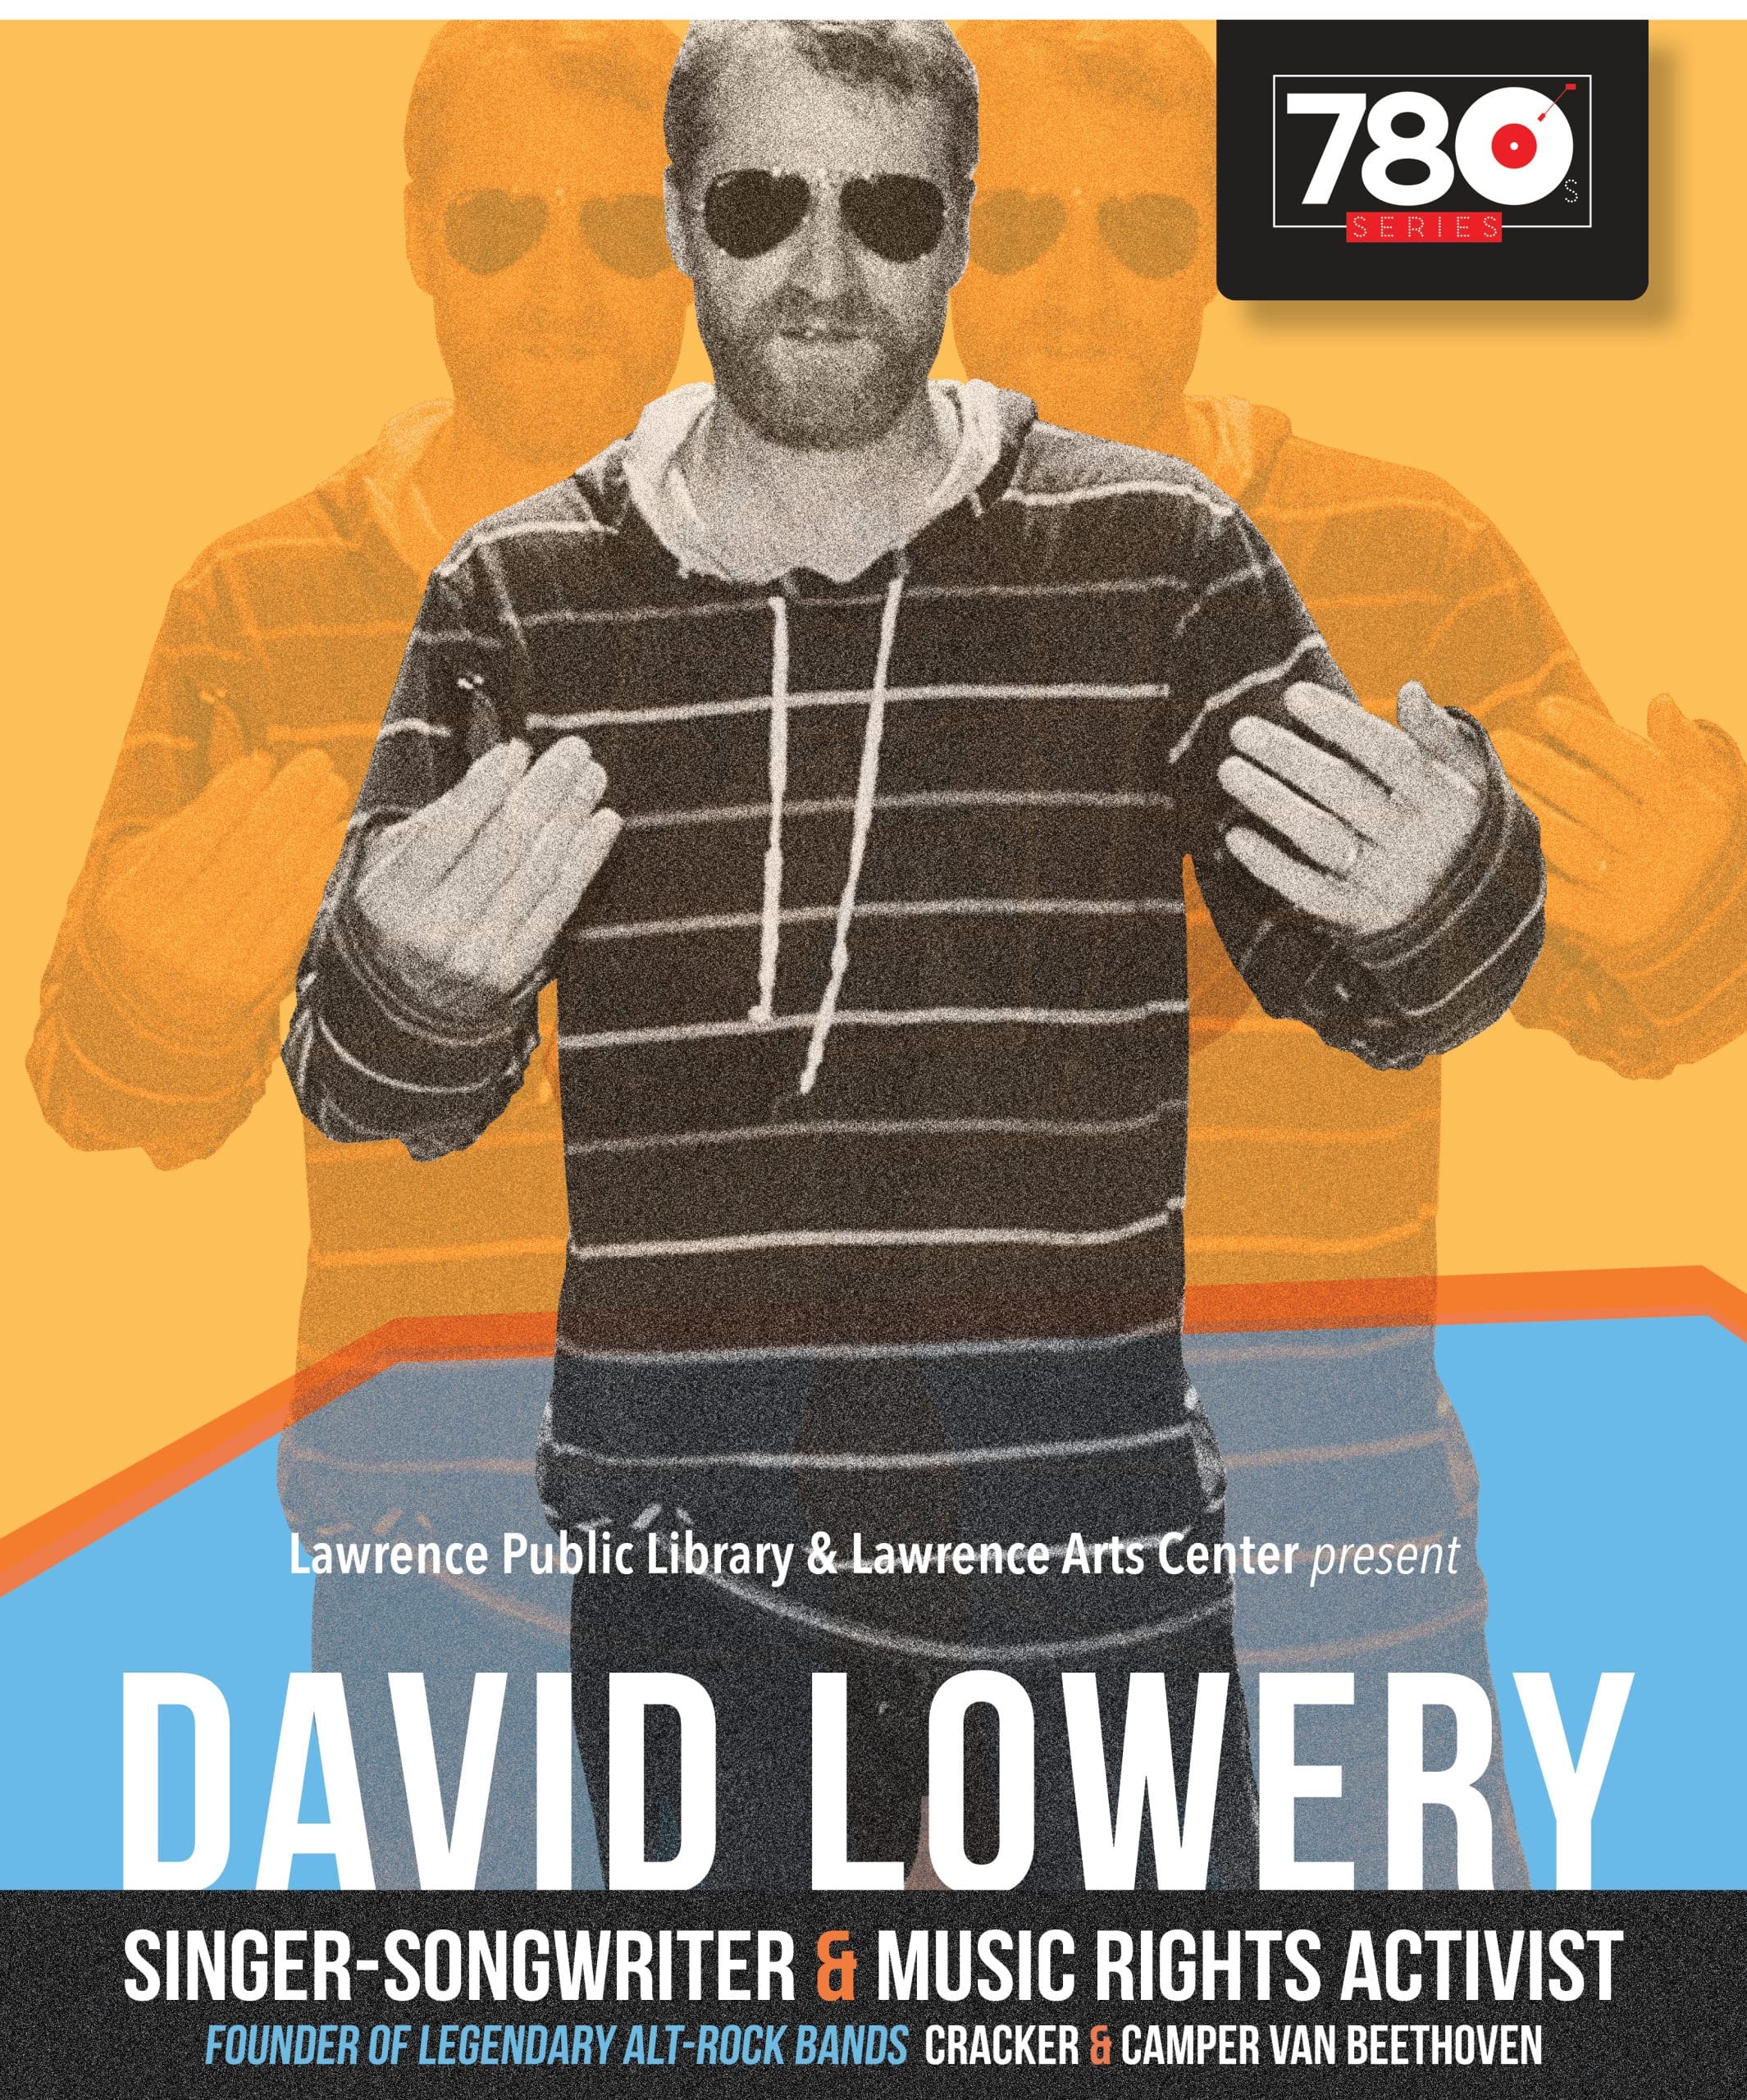 Lawrence Public Library and Lawrence Arts Center present David Lowery, singer-songwriter, music rights activist, and FOUNDER of LEGENDARY ALT-ROCK BANDS Cracker & Camper Van Beethoven